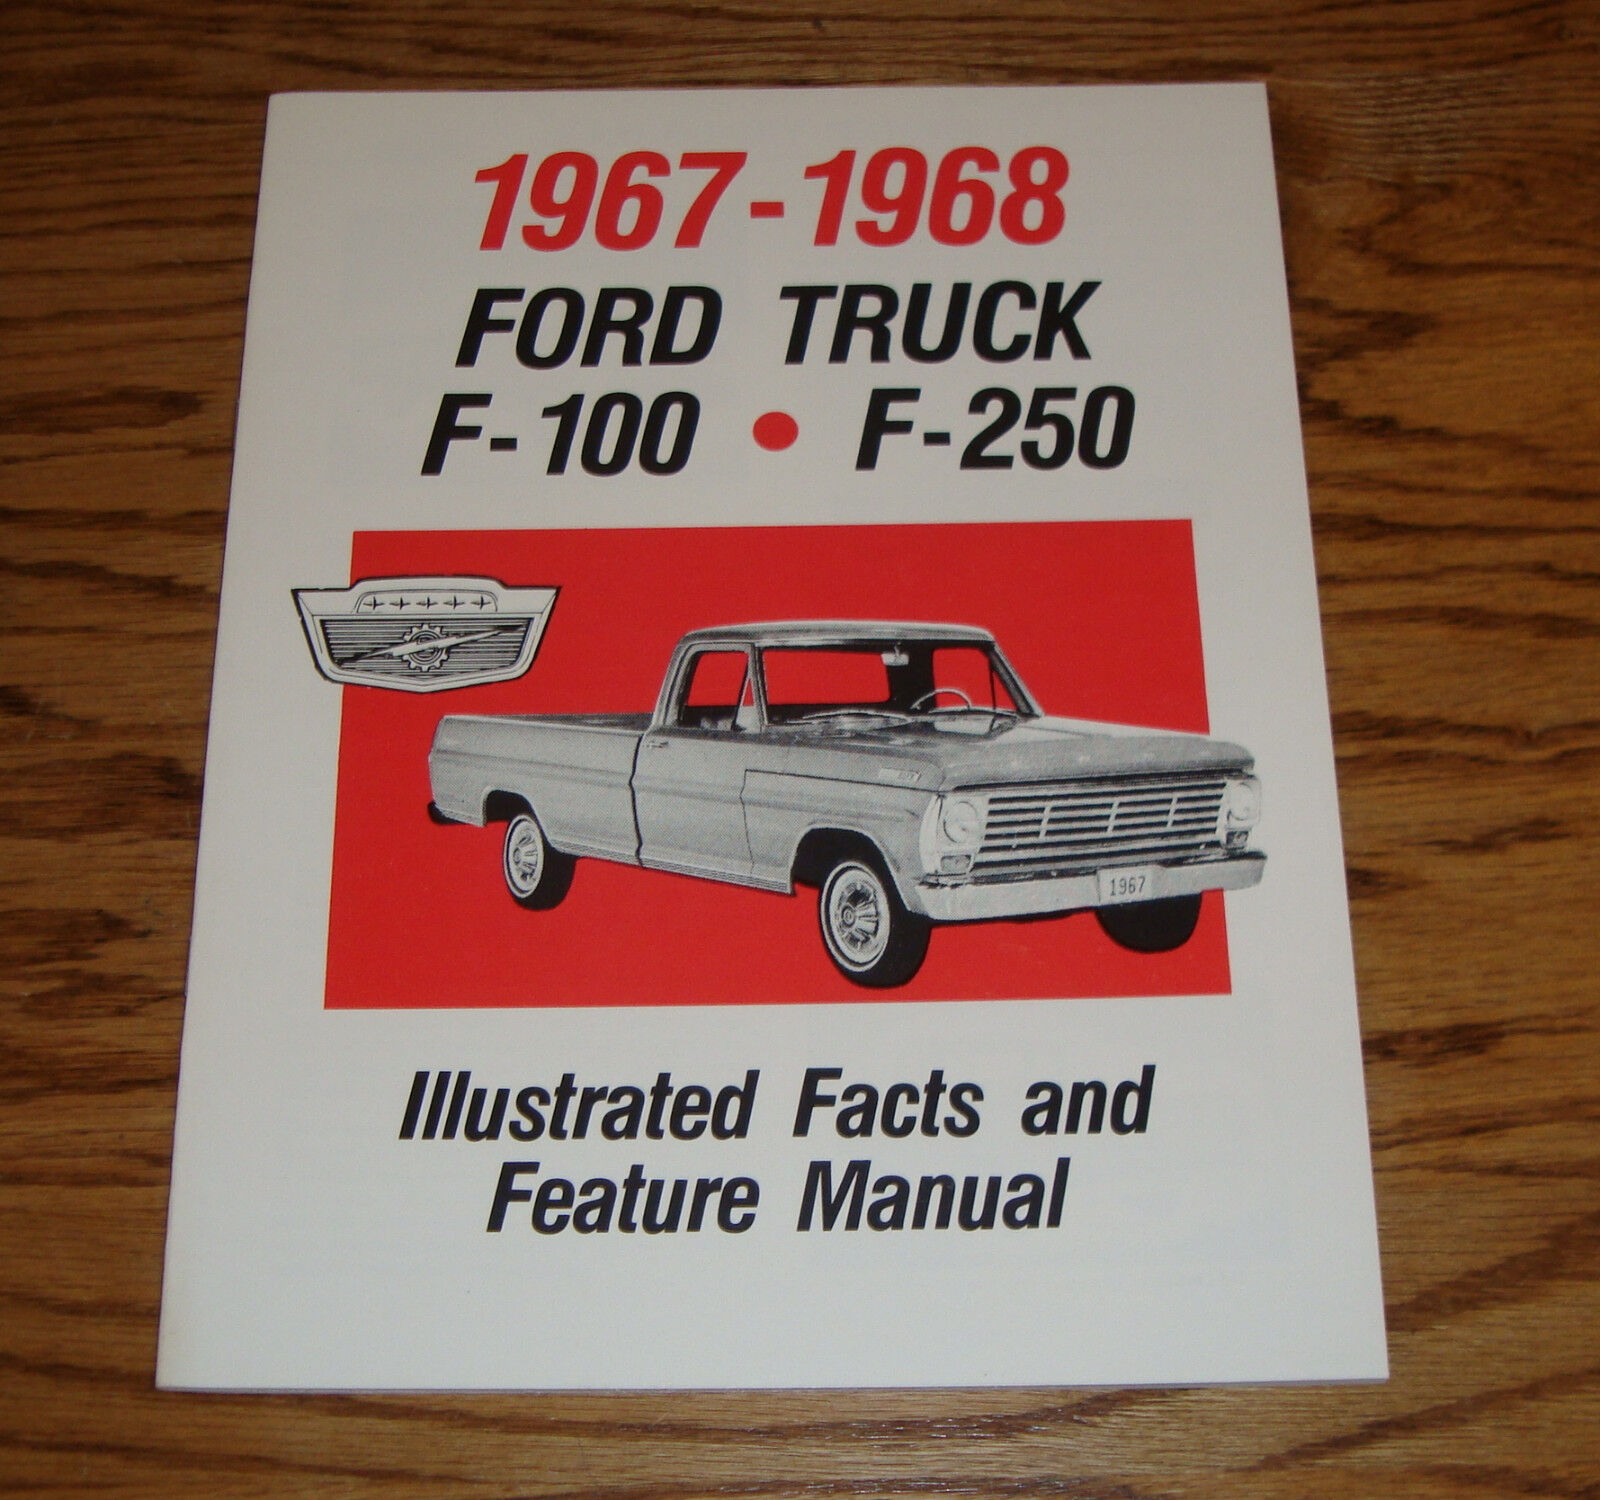 1967 - 1968 Ford Truck Illustrated Facts & Feature Manual 67 68 F-100 F-250